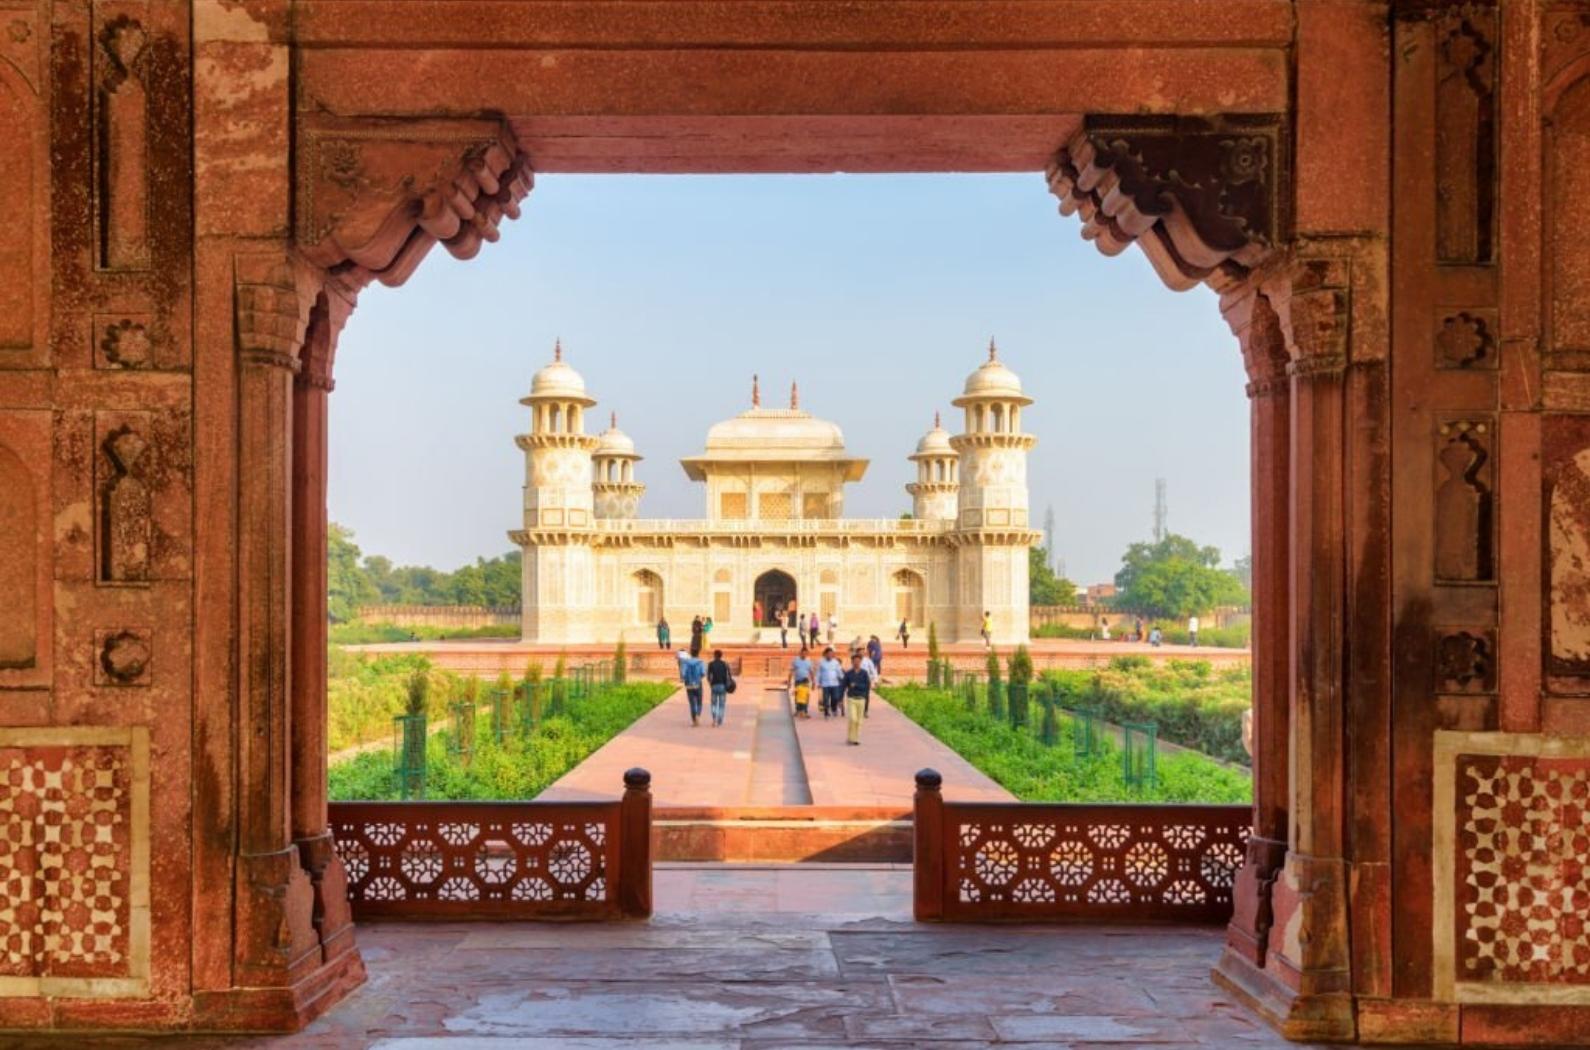 Unusual view of the Tomb of Itimad-ud-Daulah (Baby Taj) through red sandstone gate. The white marble mausoleum is a popular tourist attraction of South Asia.